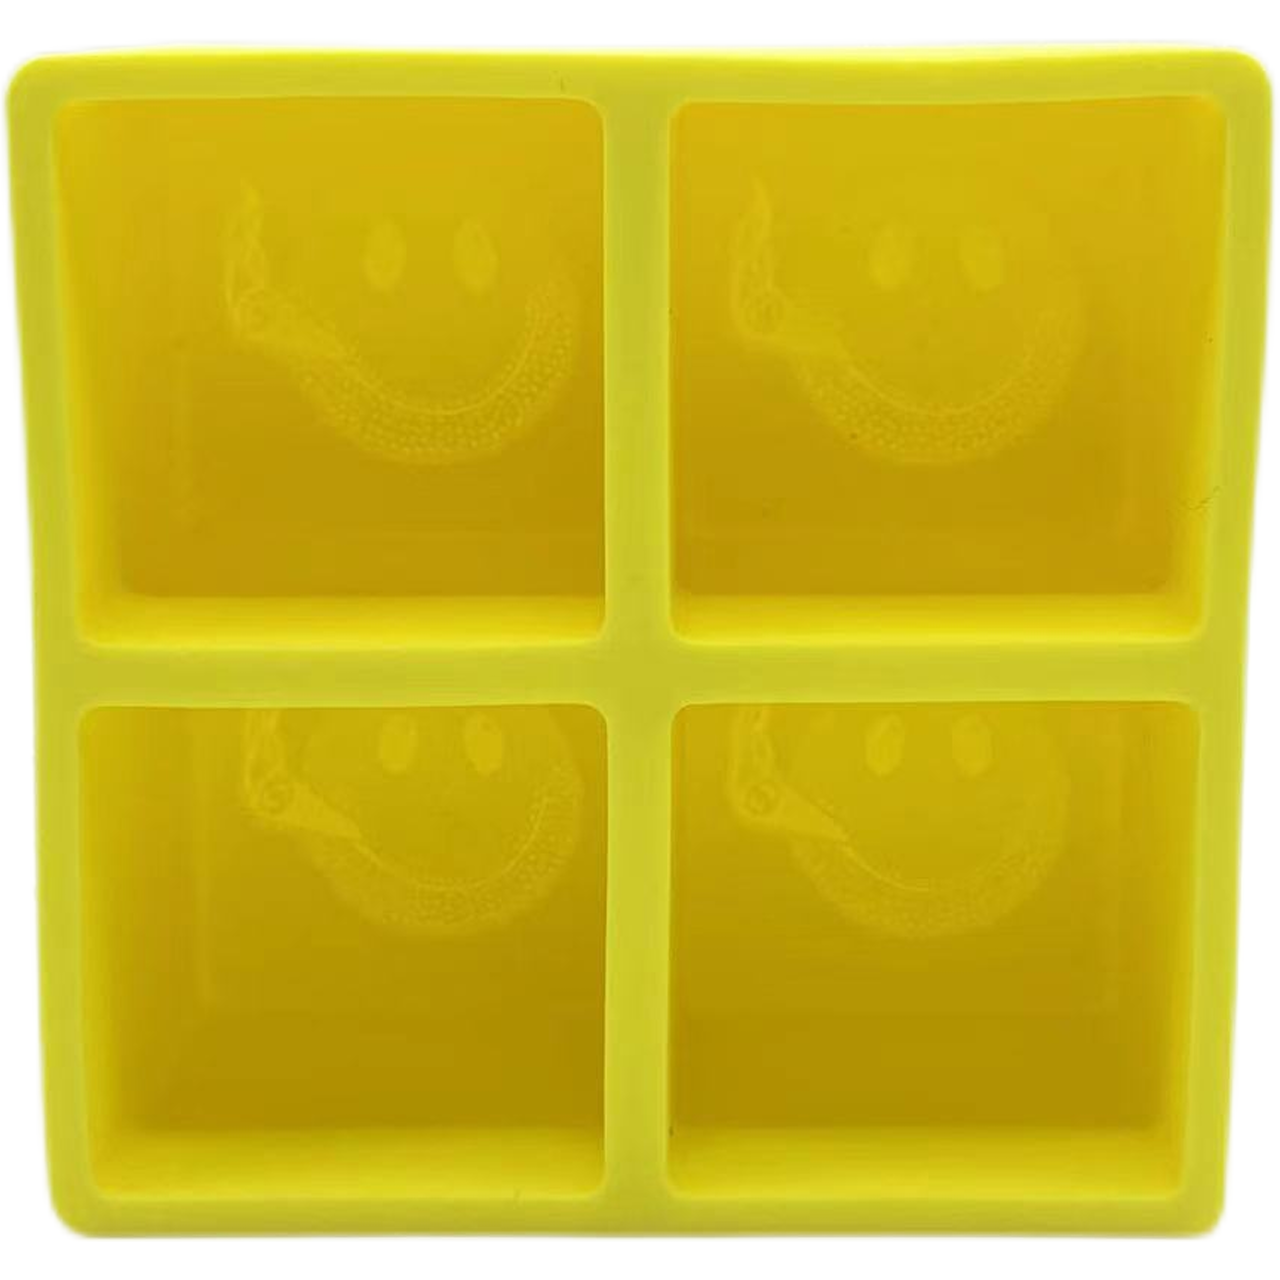 Smiley Face Square Silicone Ice tray